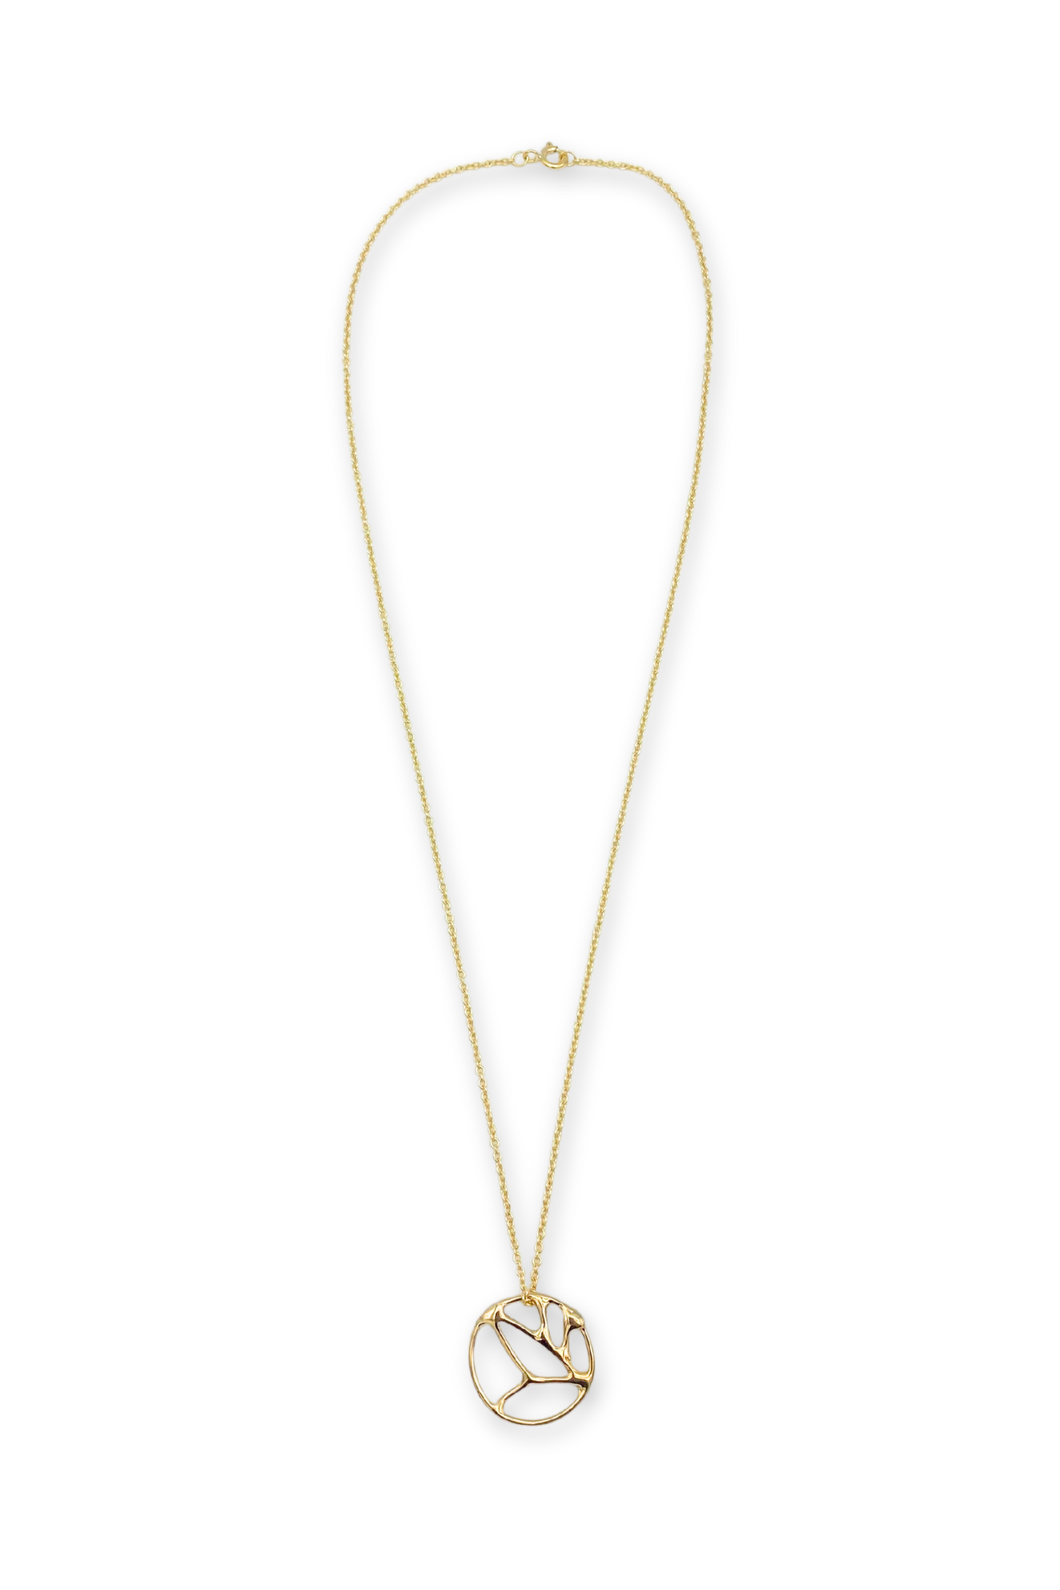 Medium Courage Pendant Necklace in Gold Plated Brass